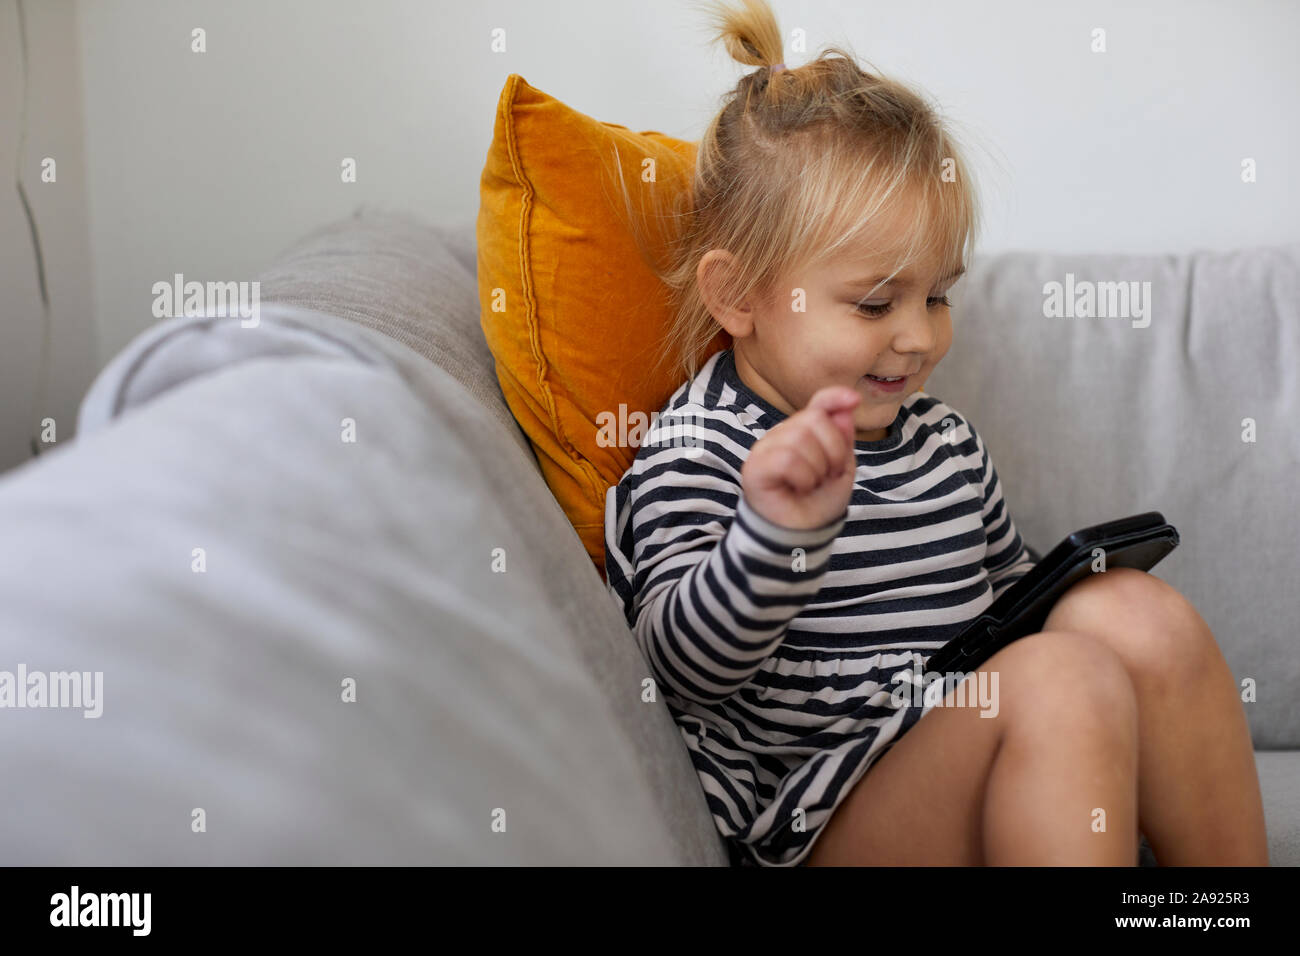 Girl on sofa using cell phone Banque D'Images